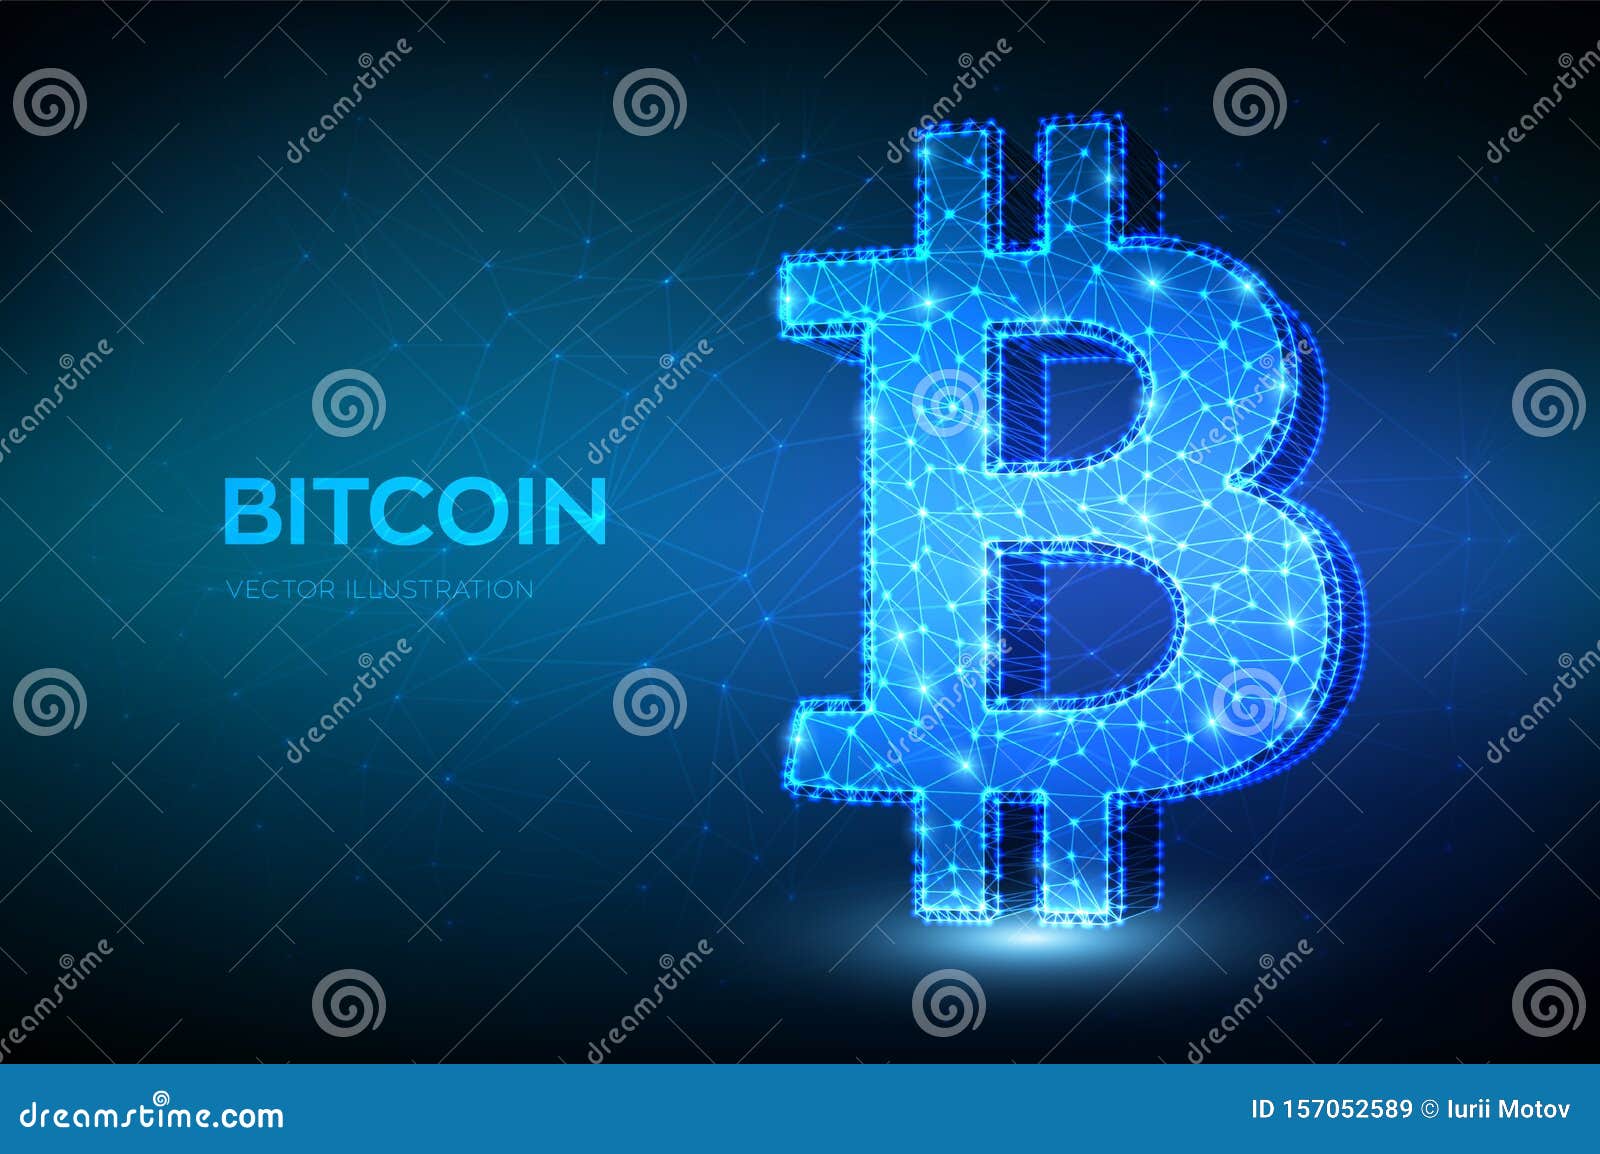 Bitcoin. Low Poly Abstract Mesh Line And Point Bitcoin ...